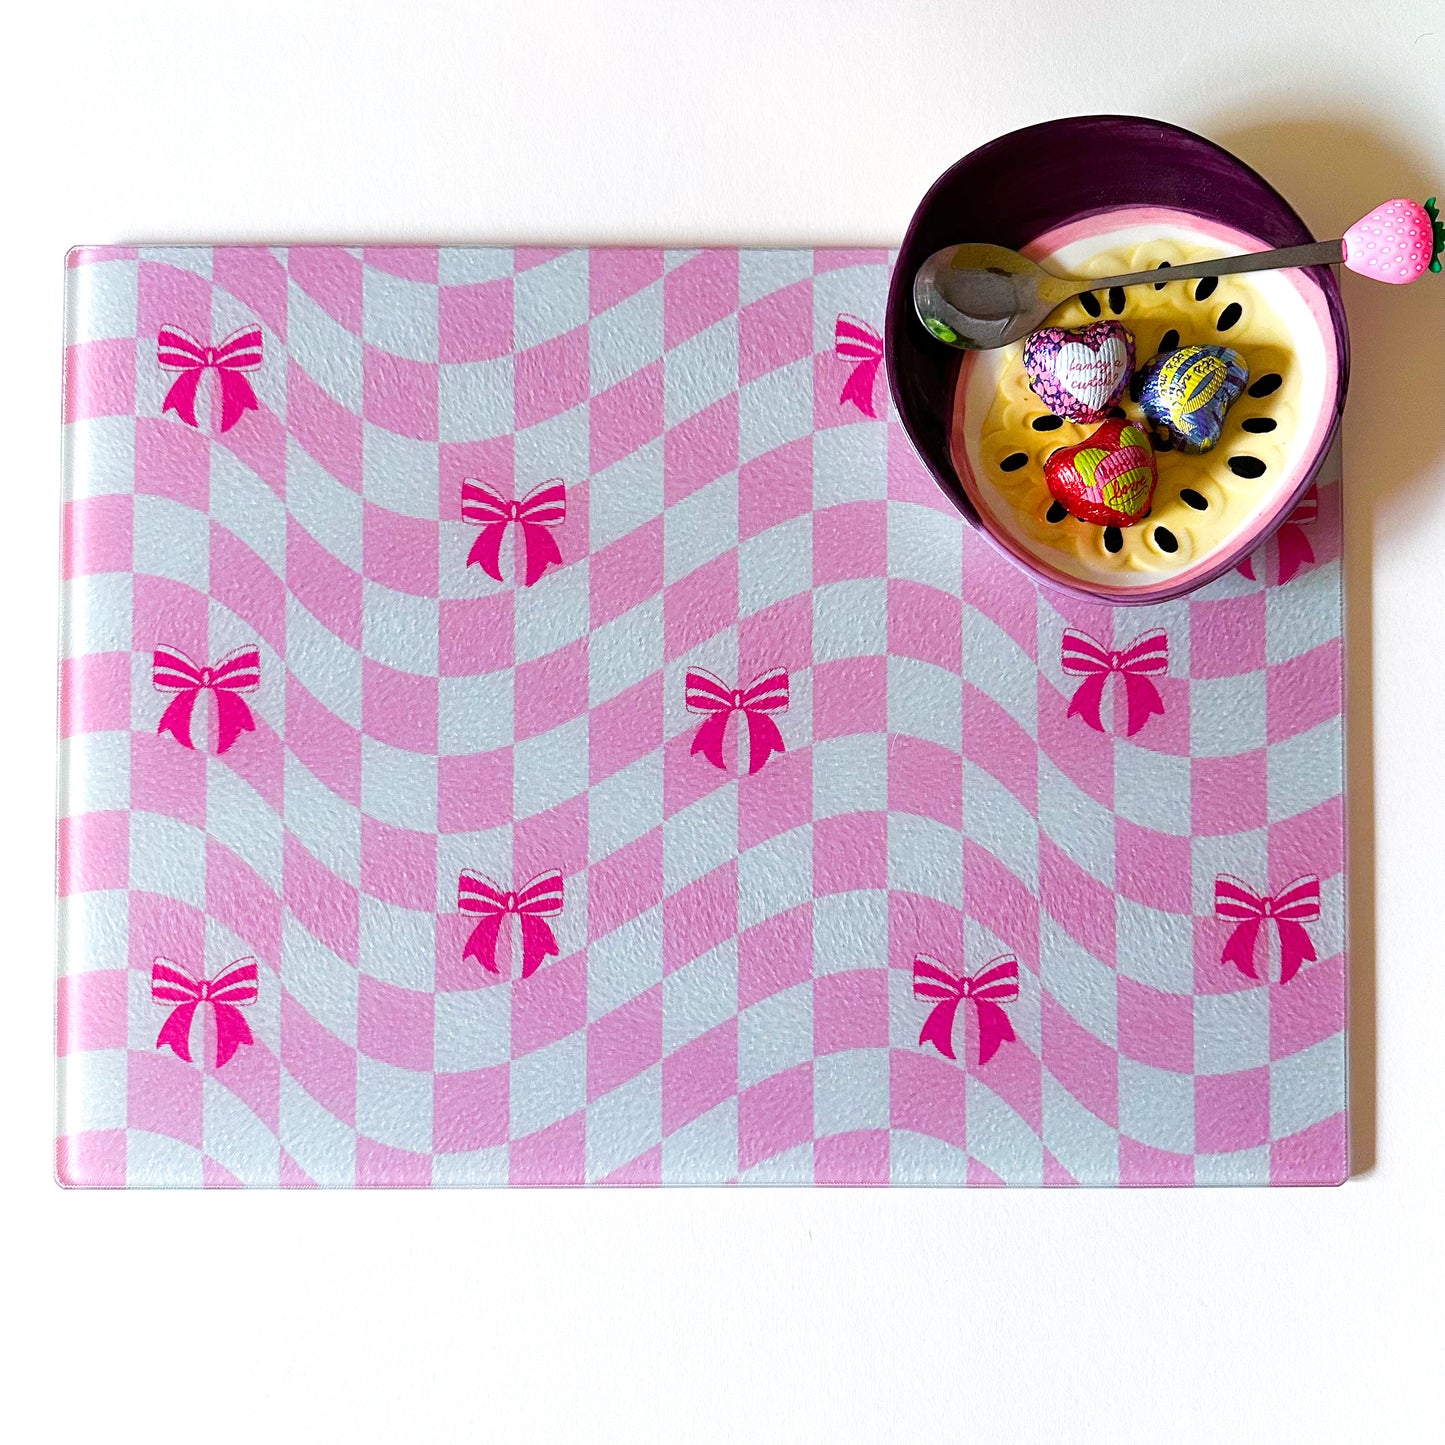 Ribbons and Checks Glass Chopping Board |Glass Worktop Saver in medium or large size